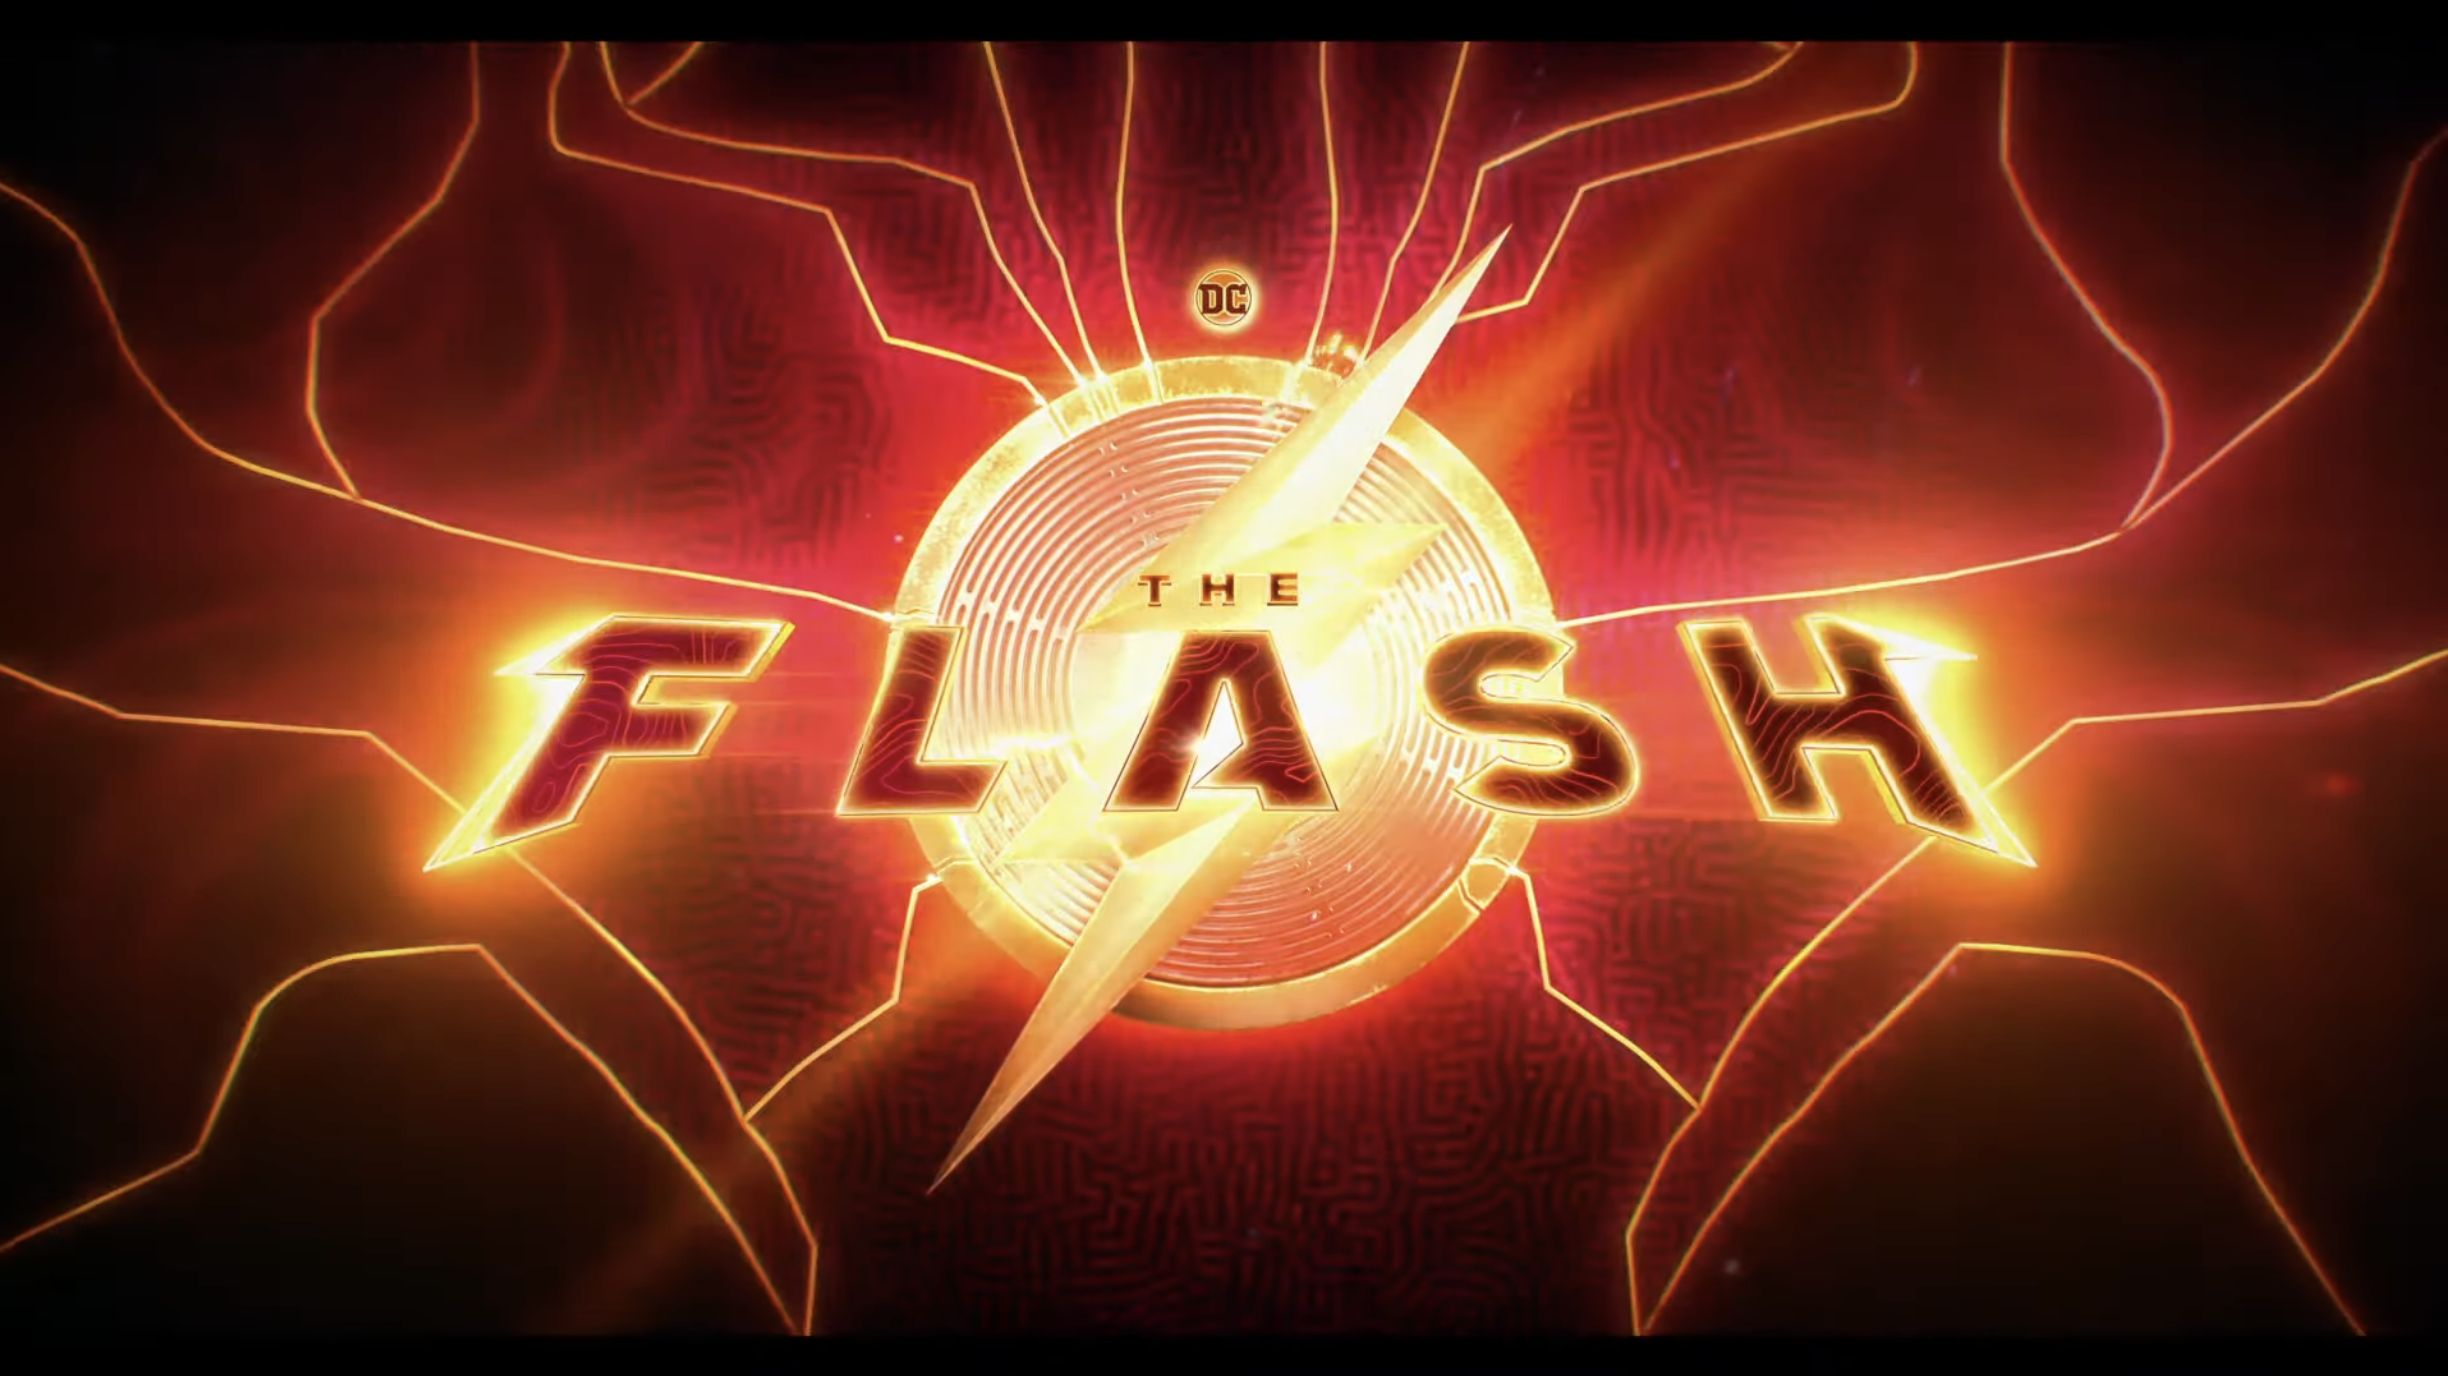 The Flash movie preview at DC Fandome